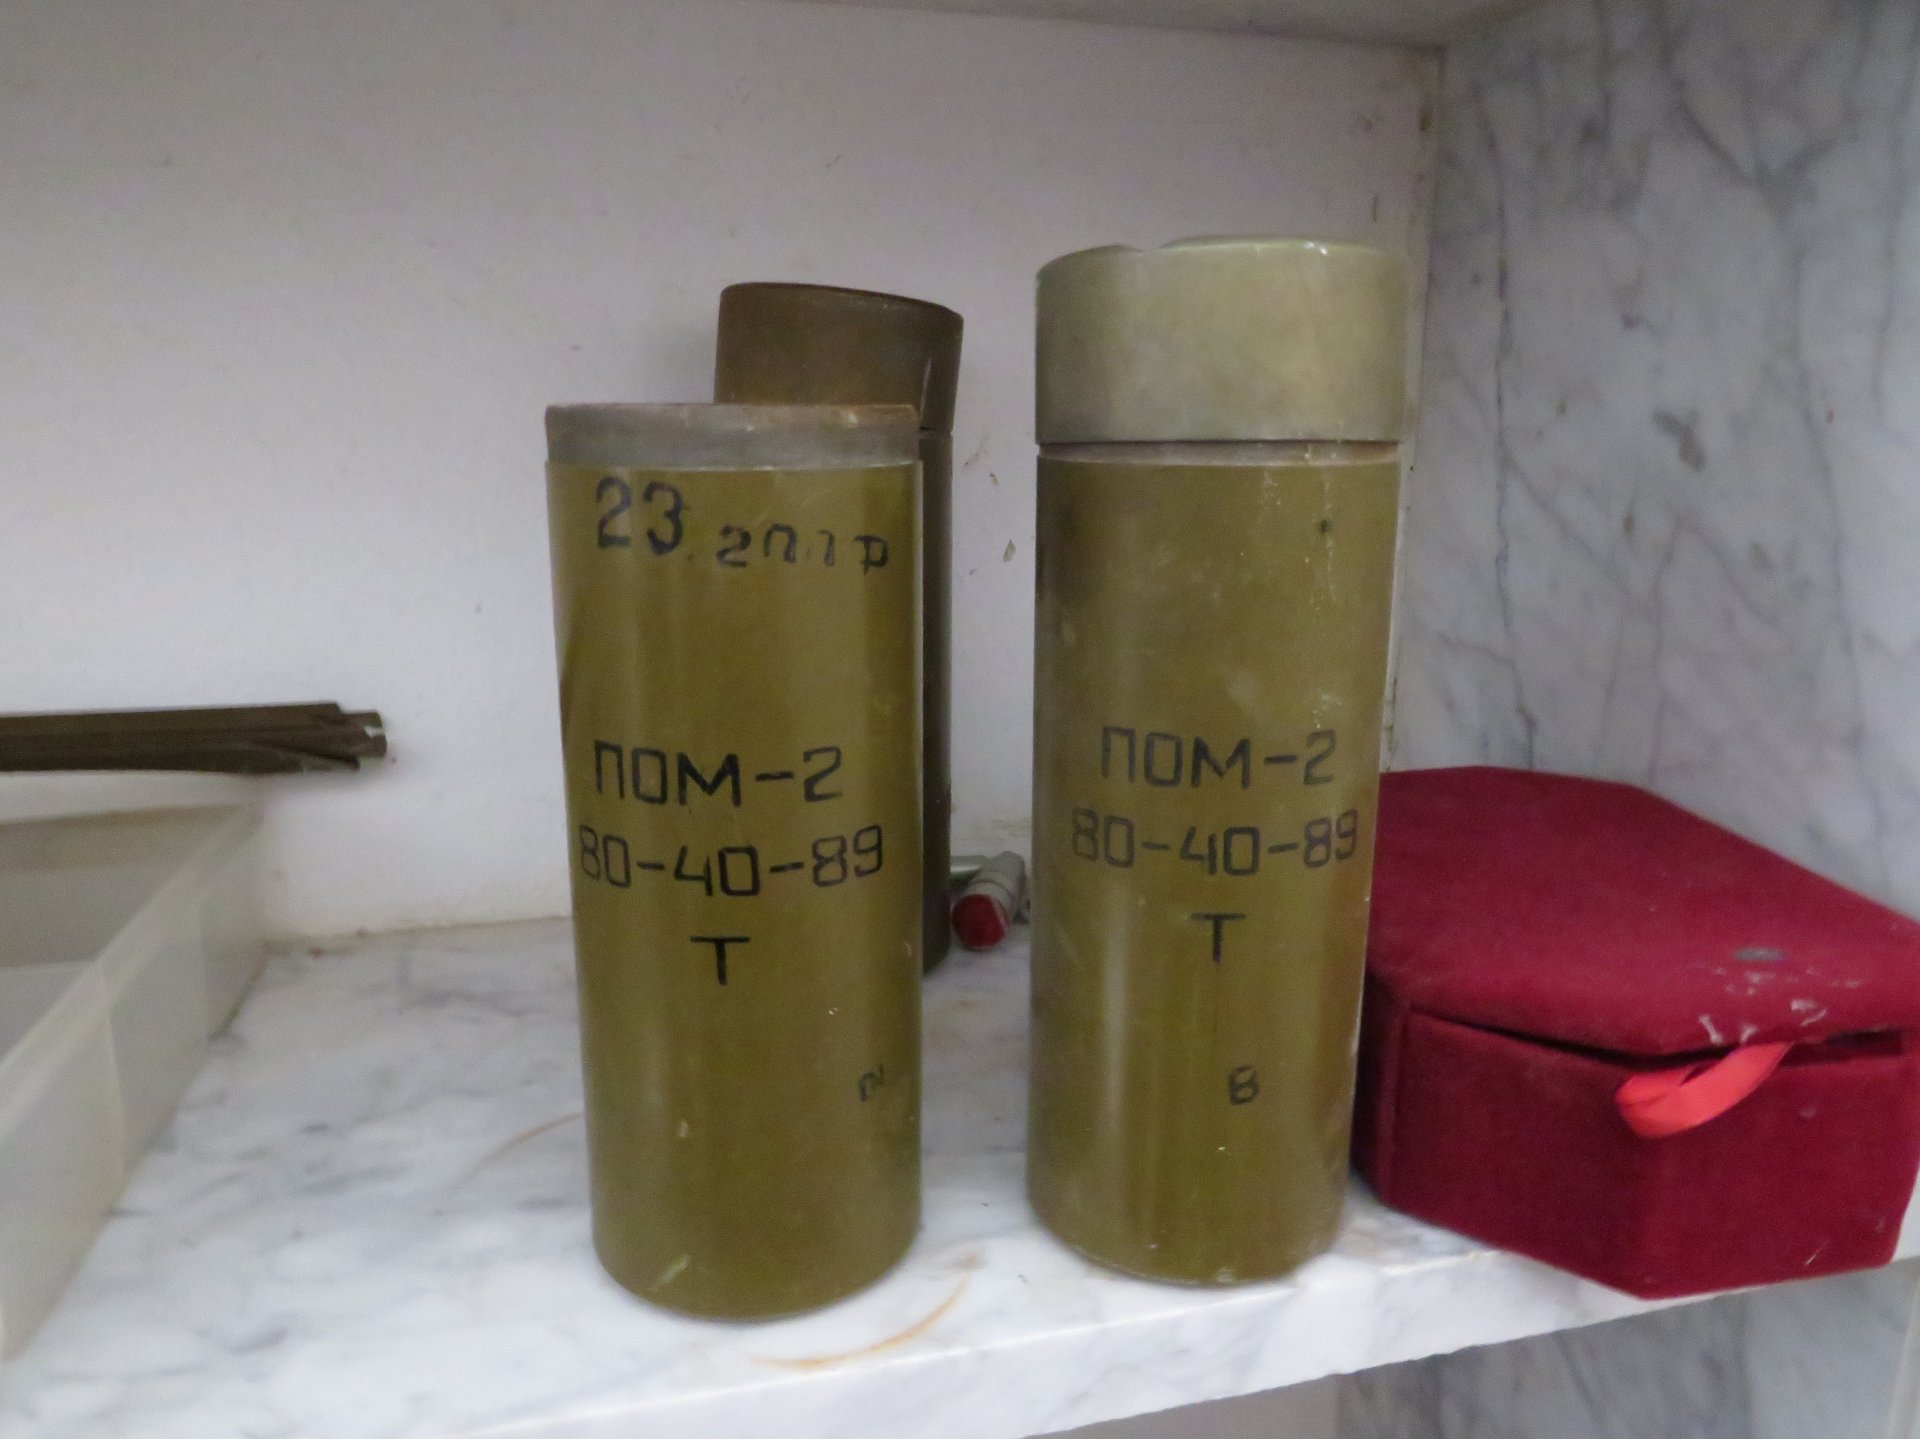 PAM-2 anti-personnel mines recovered from the Tripoli battlefield (MEE/Daniel Hilton)